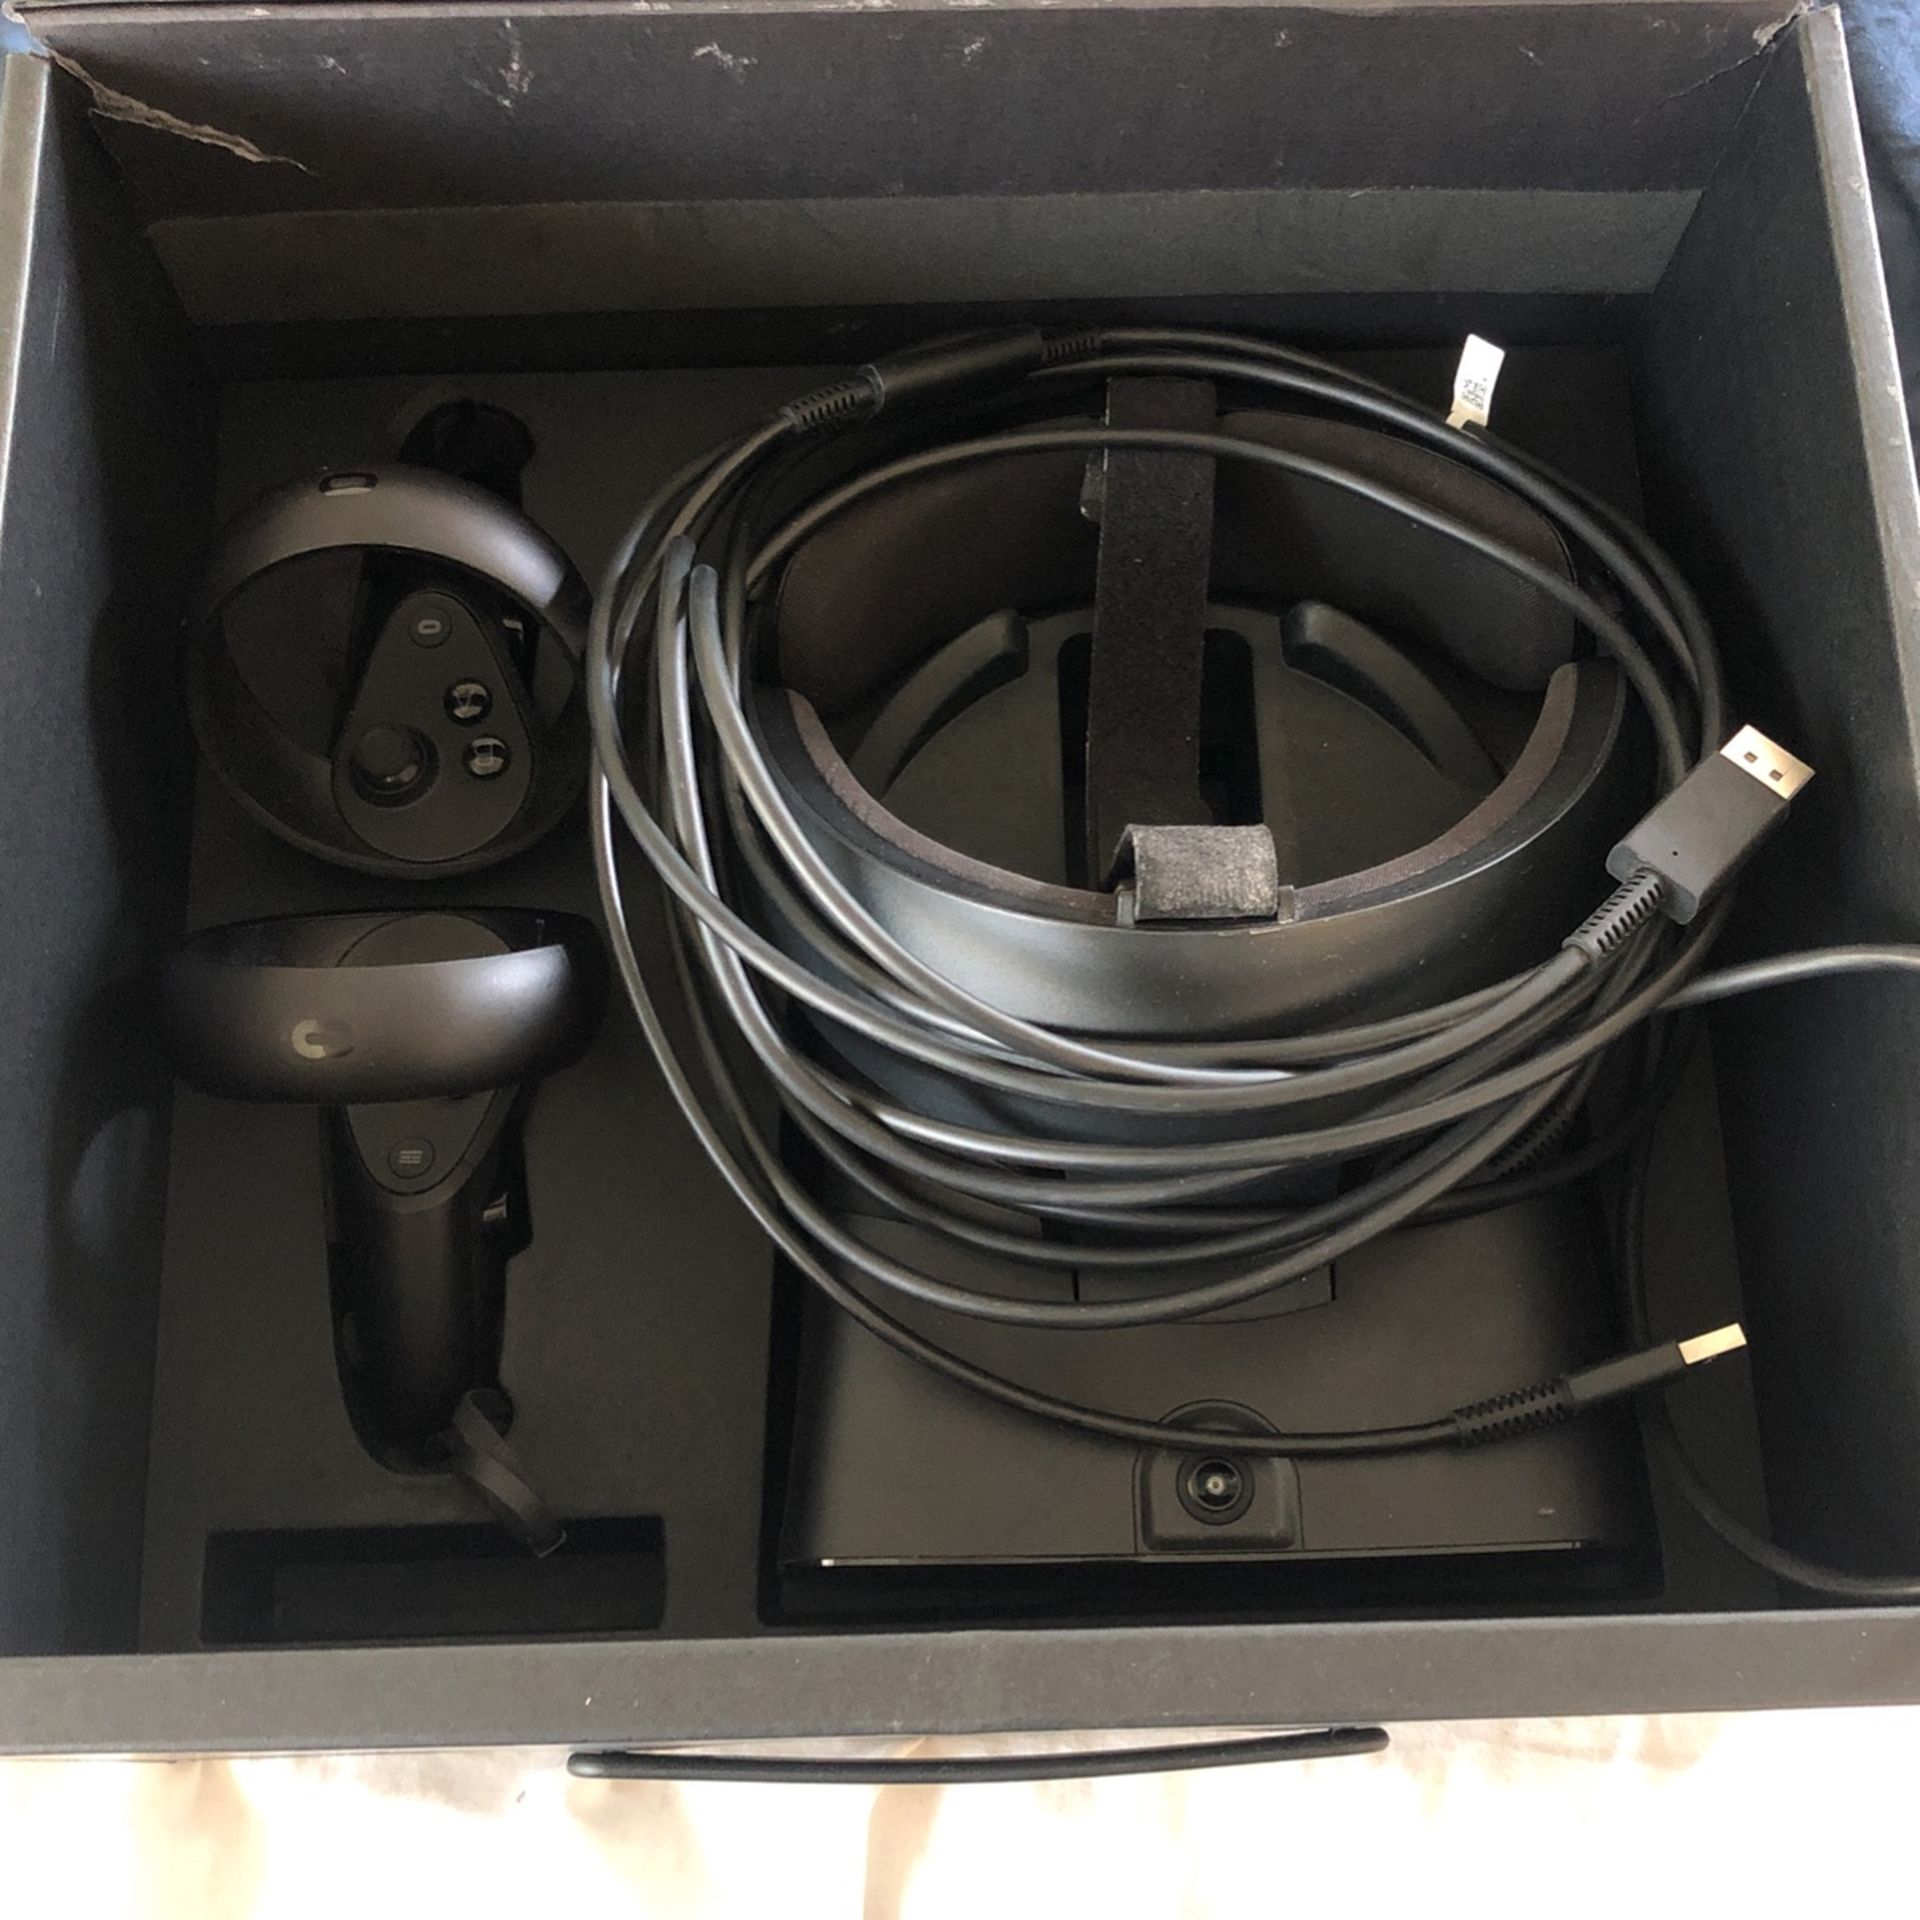 Oculus Rift S - Used Good Condition